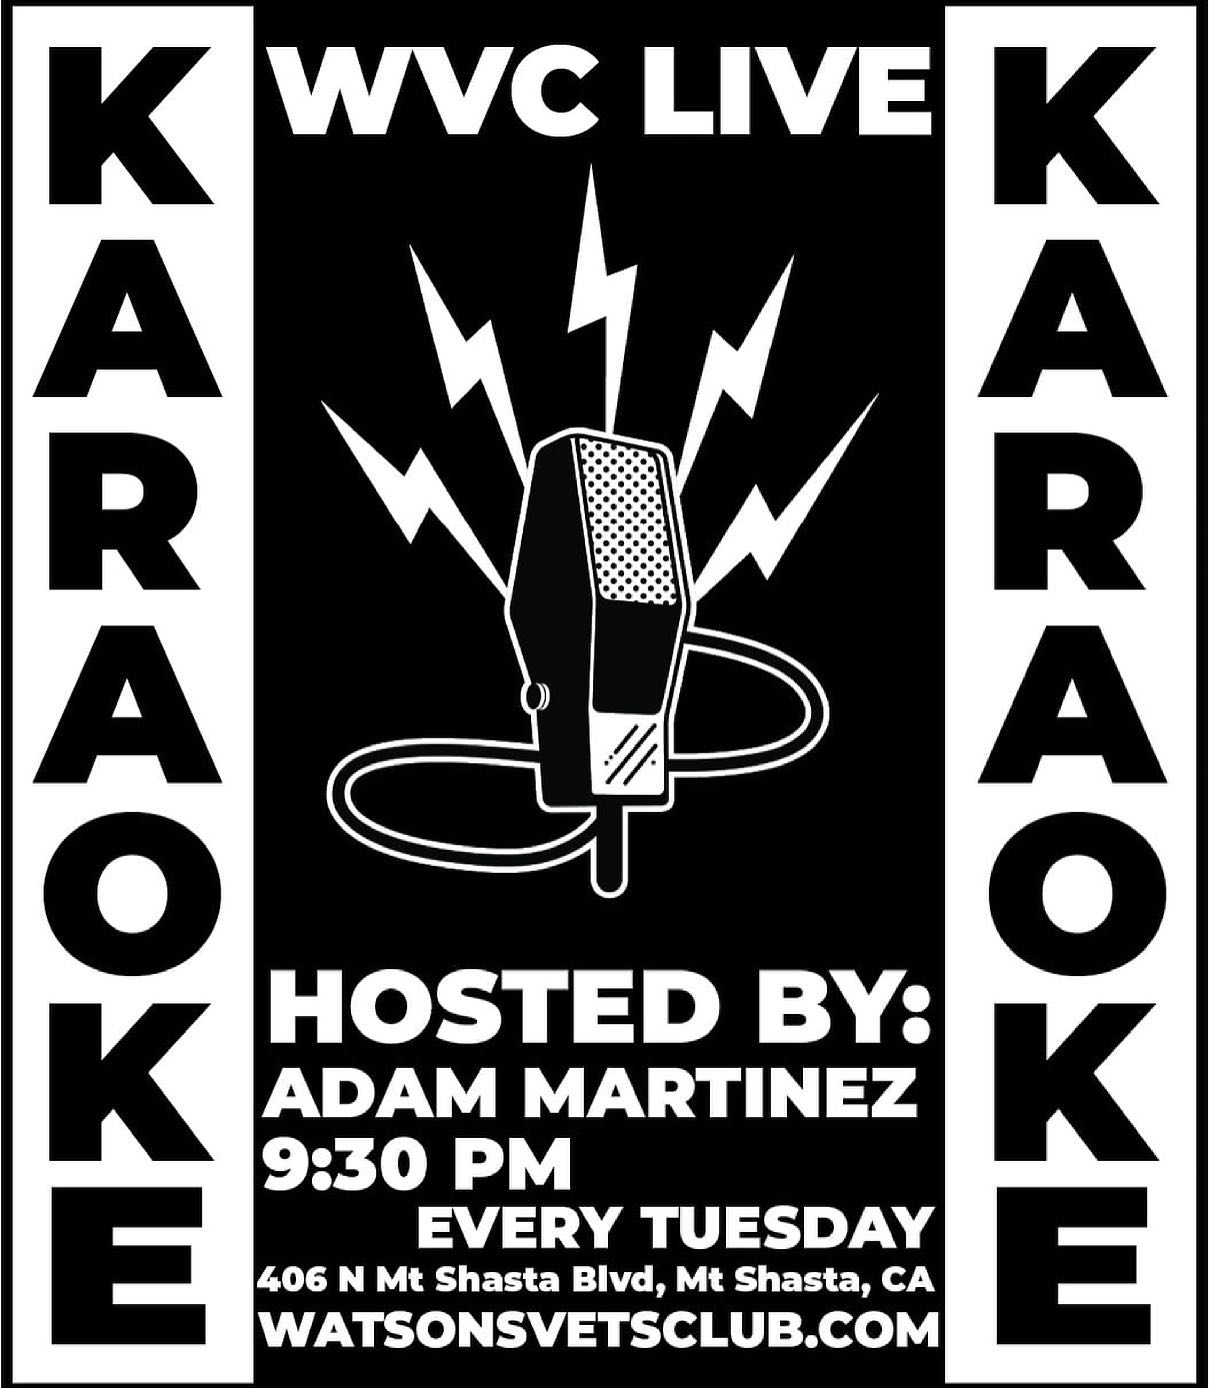 We are live right now at @watsonsvetsclub for #karaoke ! Come hang with me #djadamjames, @spatte1969 , and @earthbound.media, who is also responsible for the kick ass foyer you’re seeing now.:) See y’all soon!